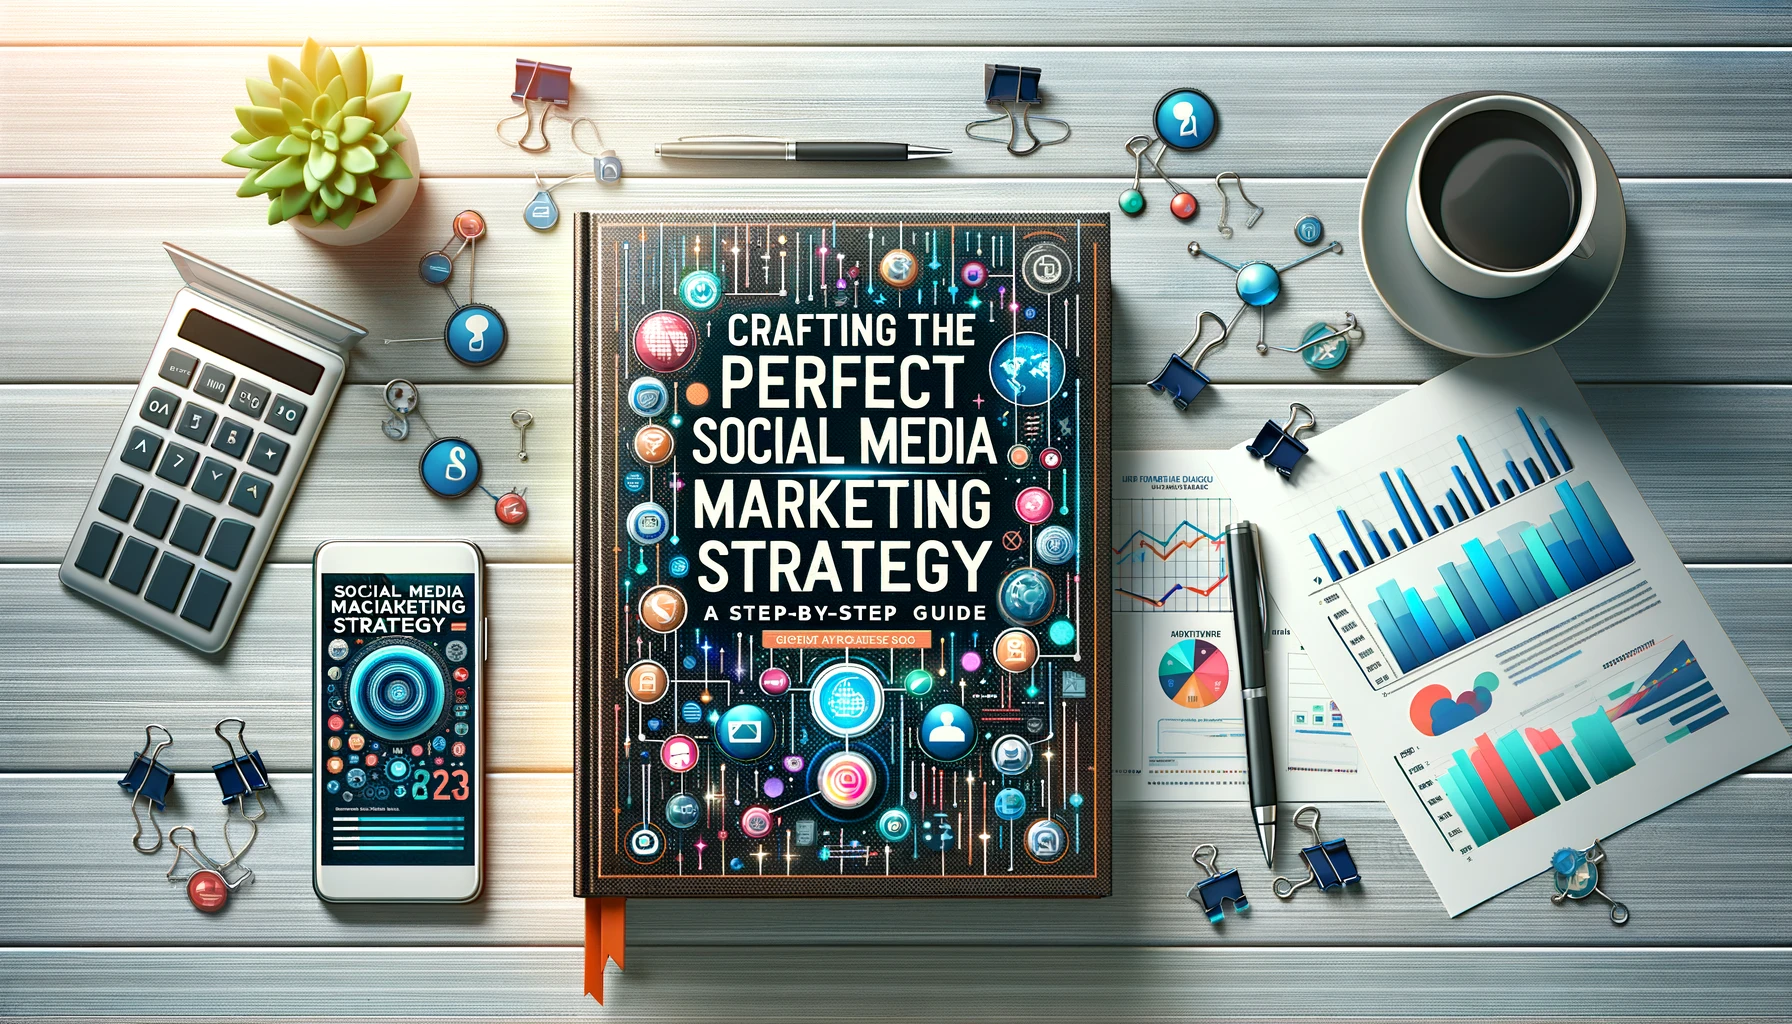 Crafting the Perfect Social Media Marketing Strategy: A Step-by-Step Guide